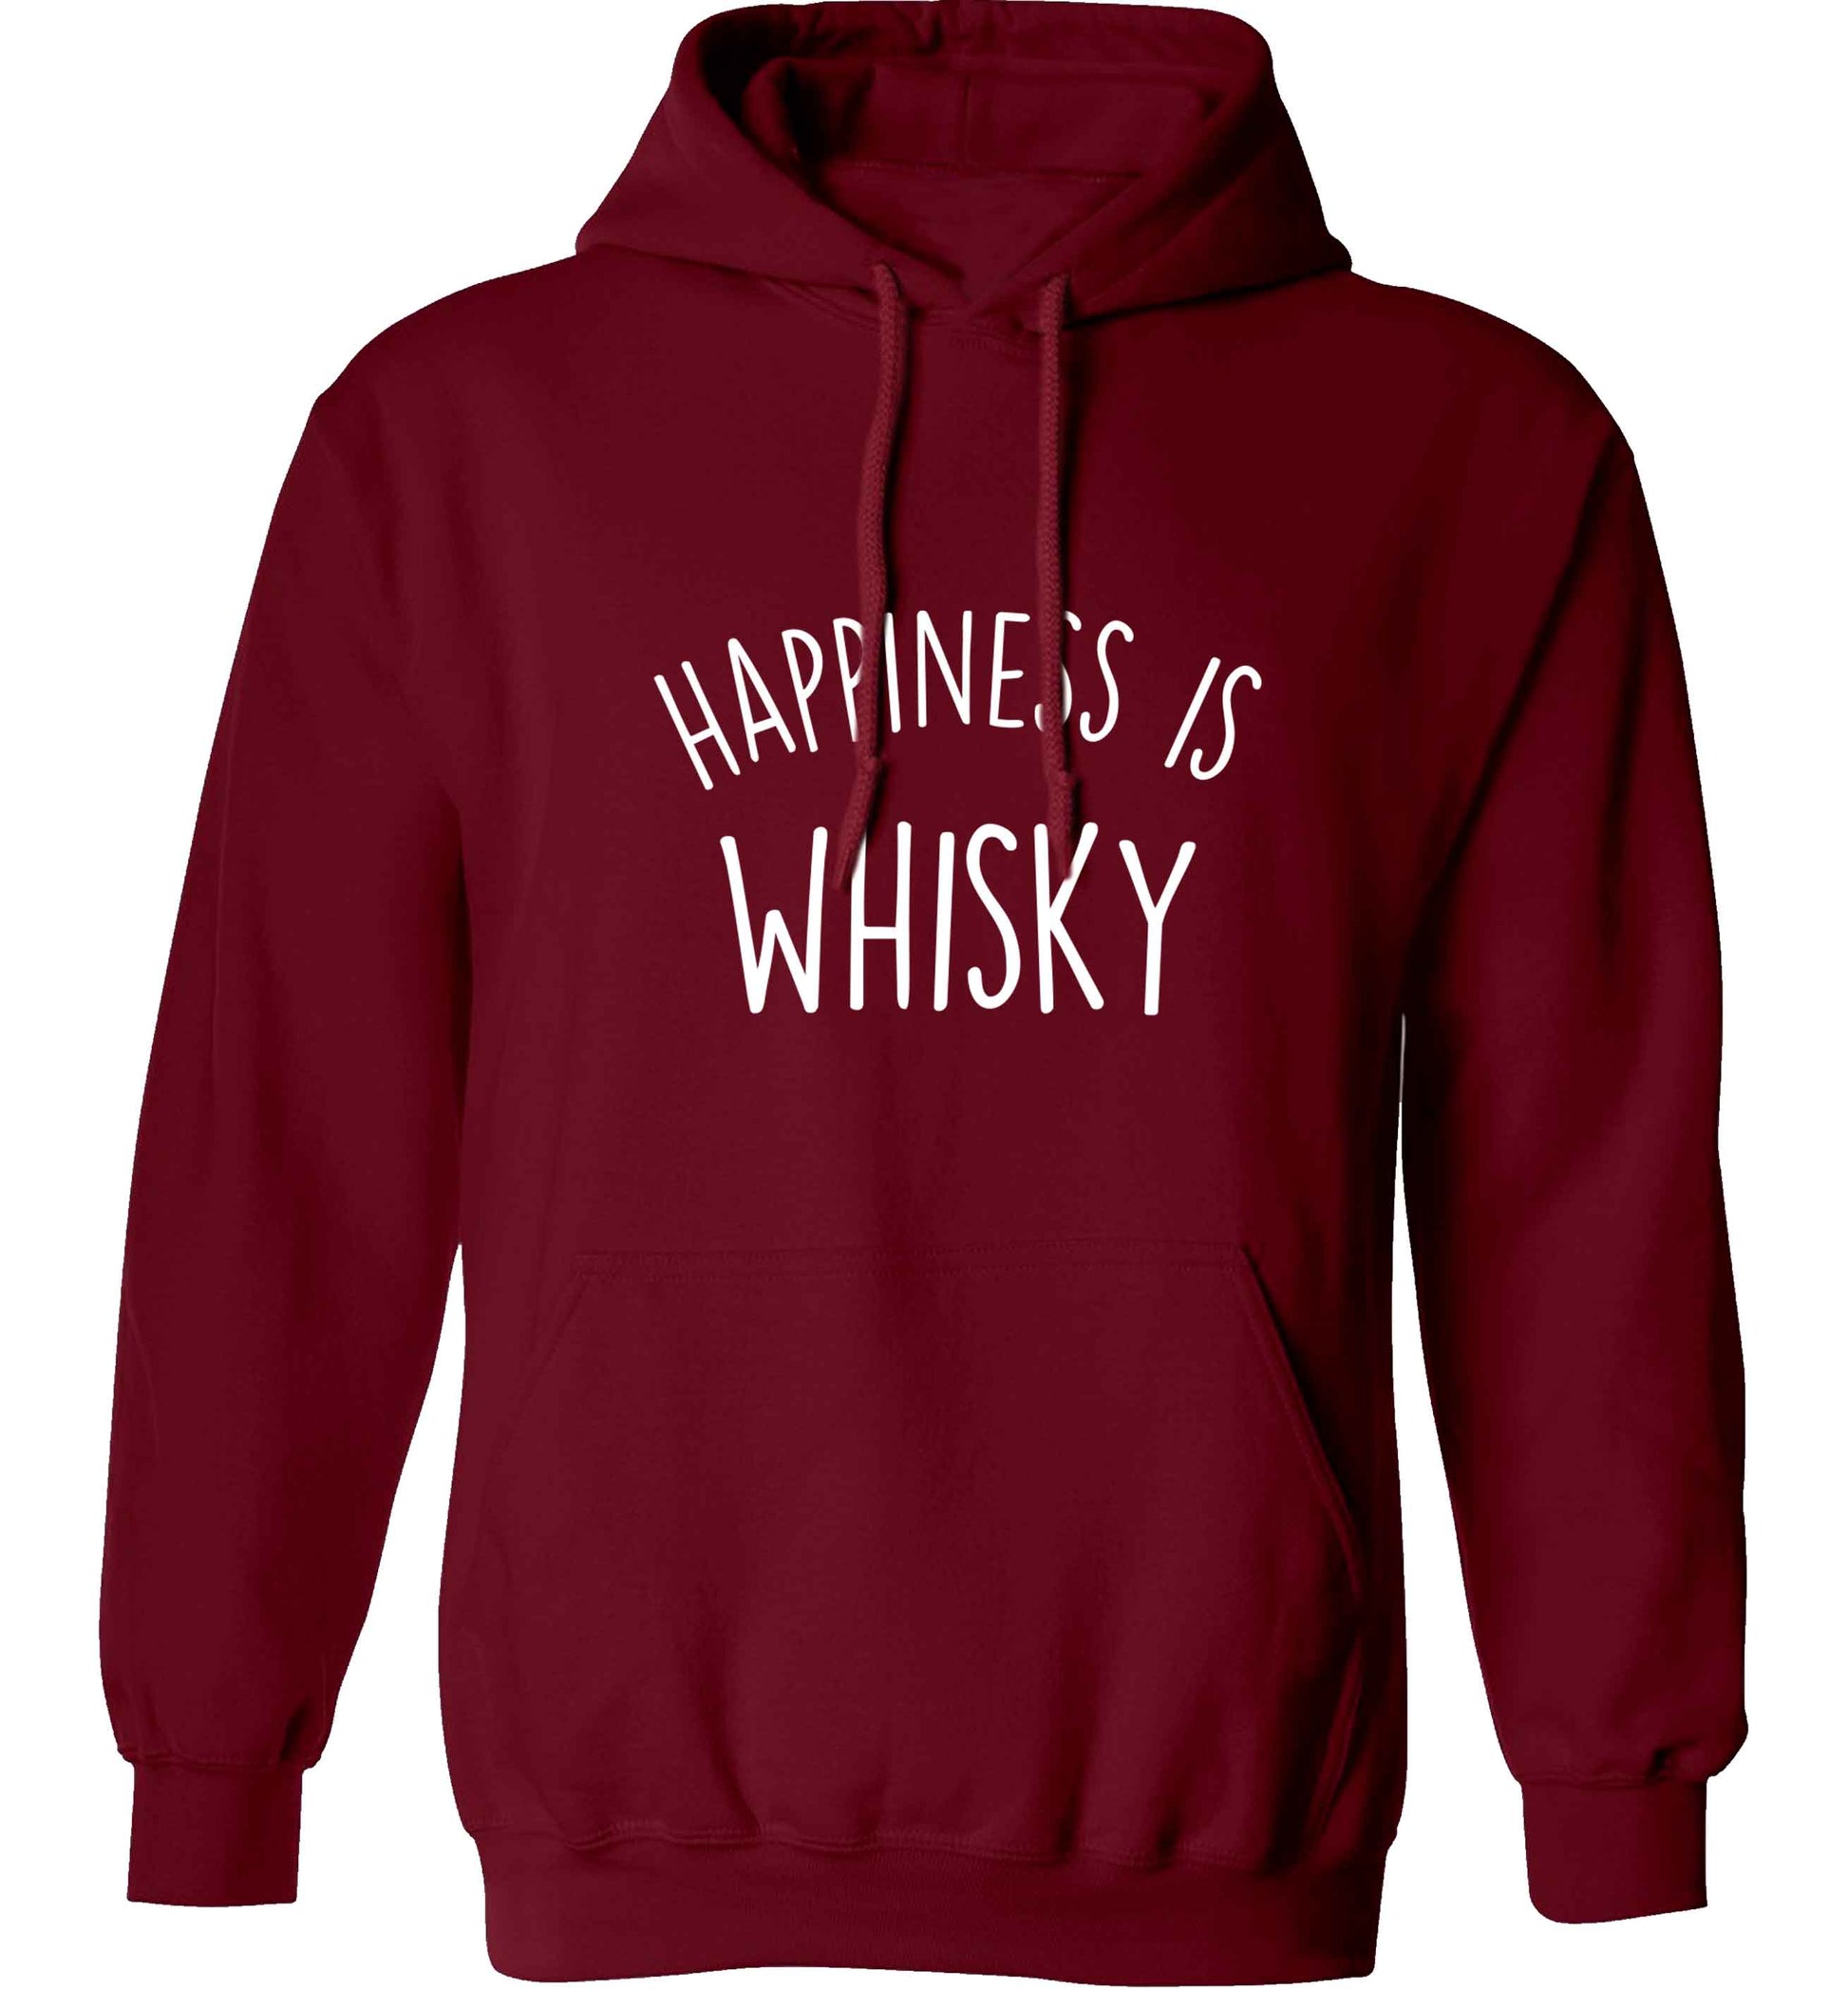 Happiness is whisky adults unisex maroon hoodie 2XL